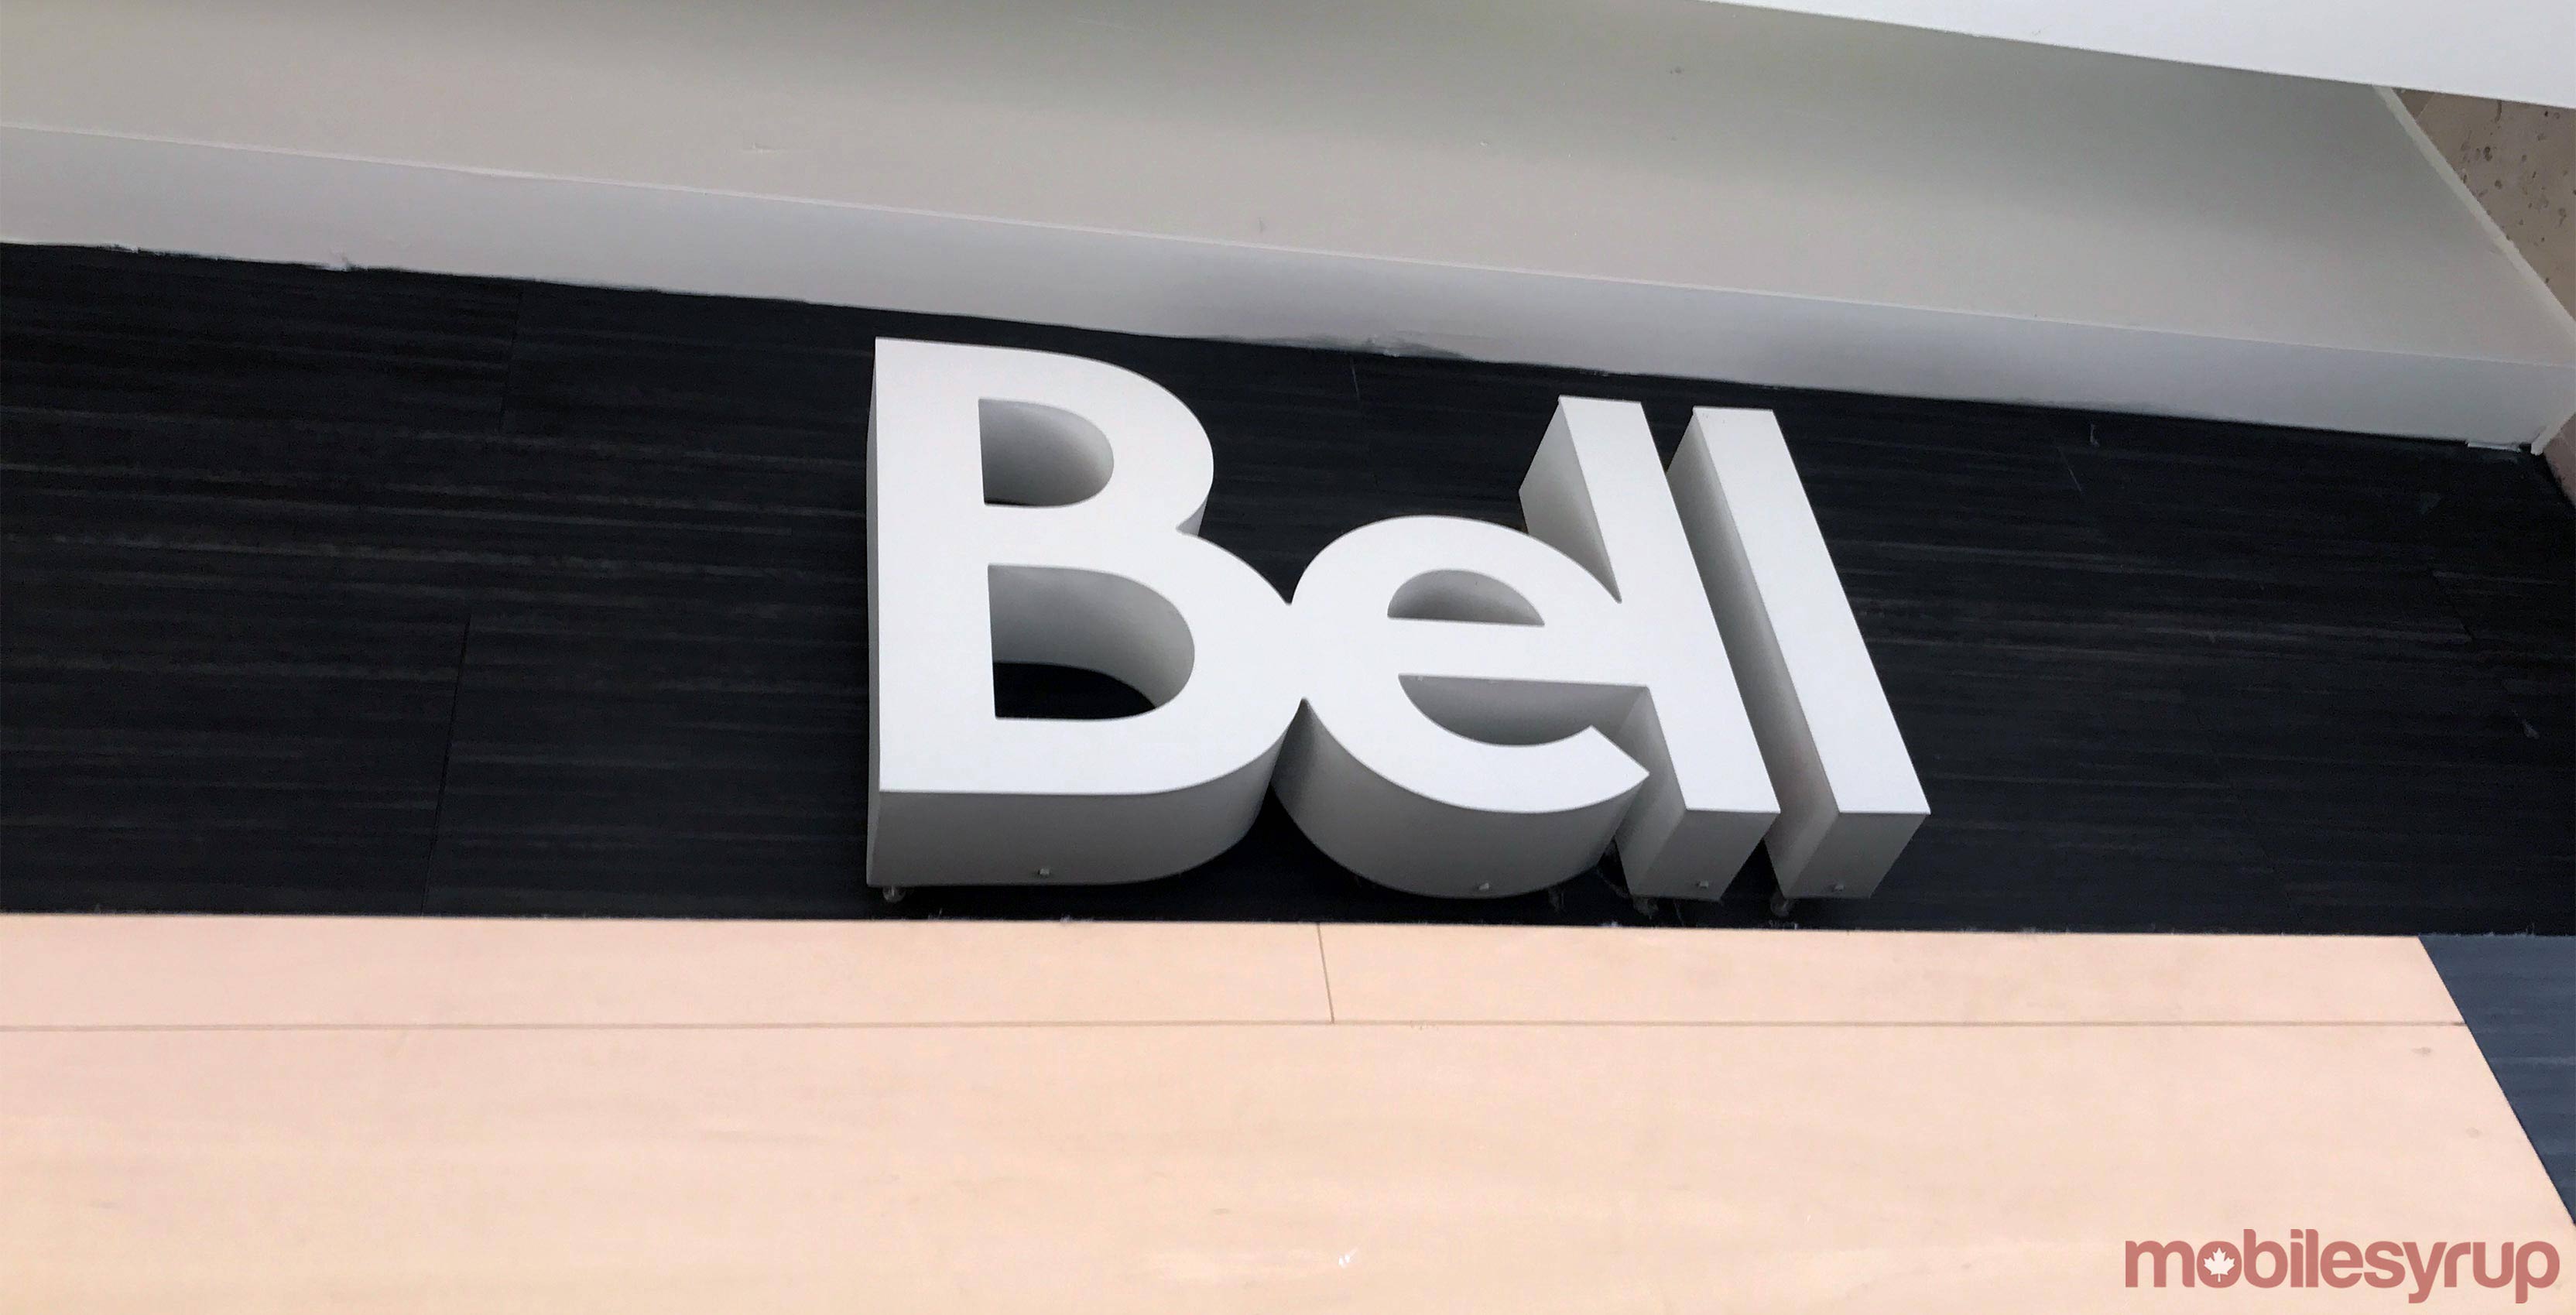 Bell logo on wall